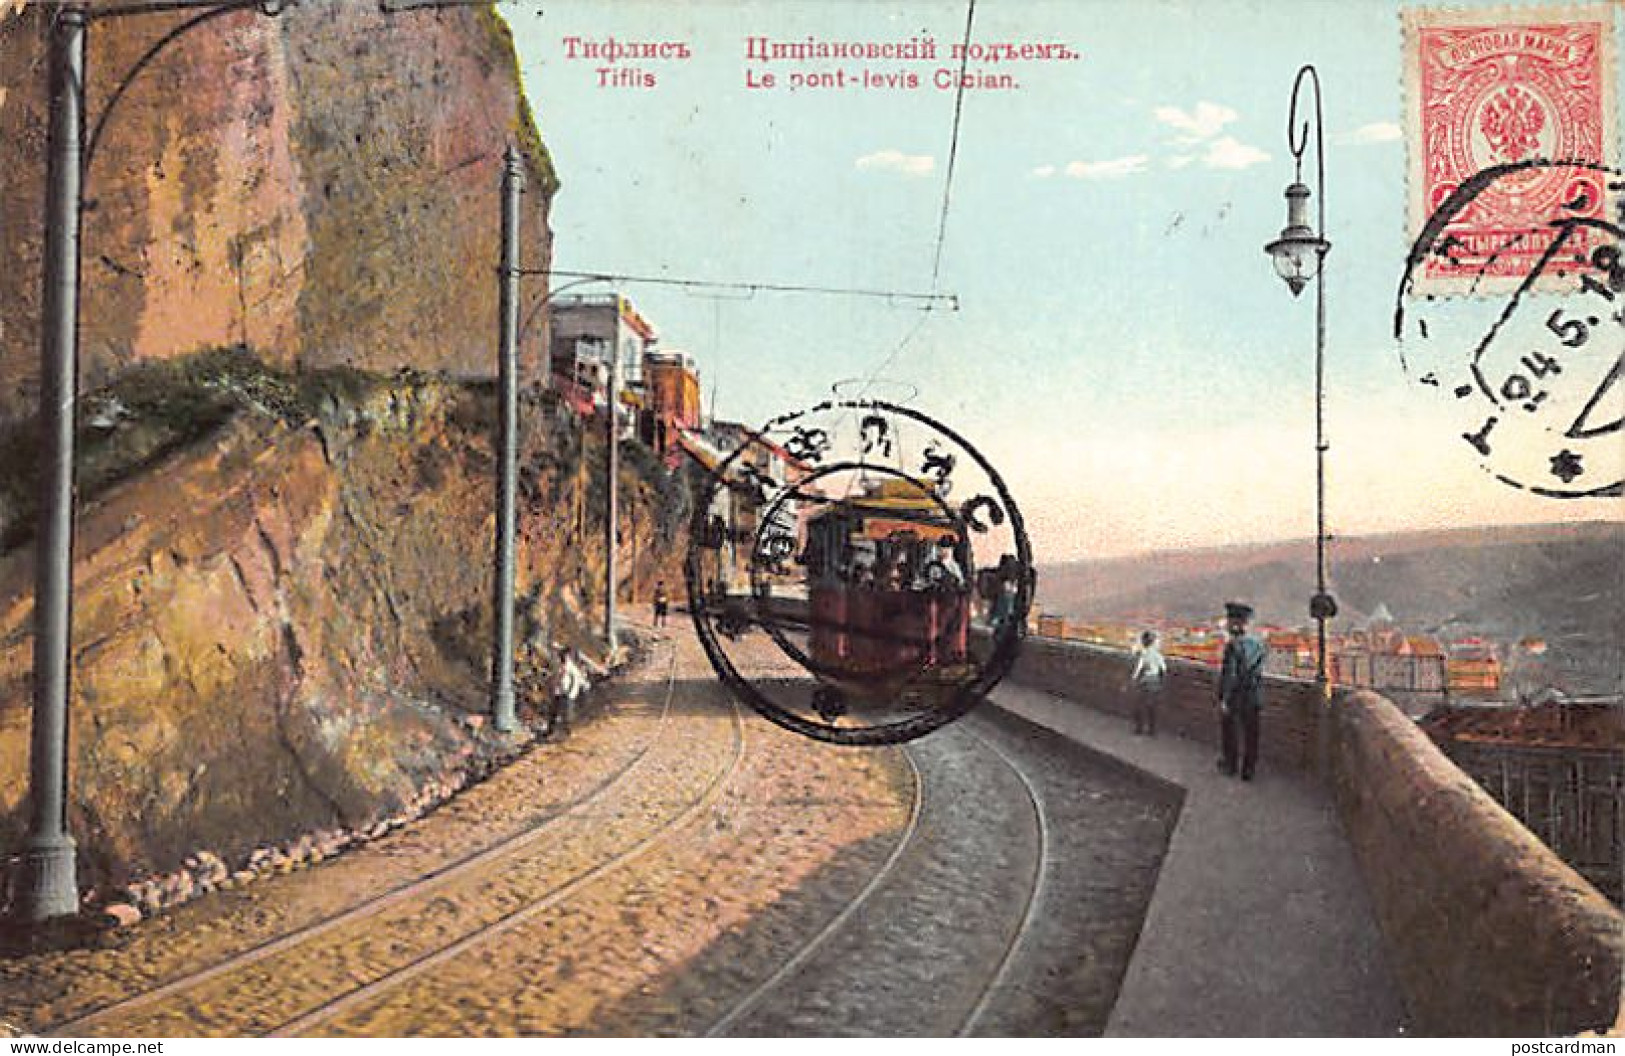 Georgia - TBILISSI - Streetcar To Cician Hill - Publ. Northern Publishing House  - Georgien